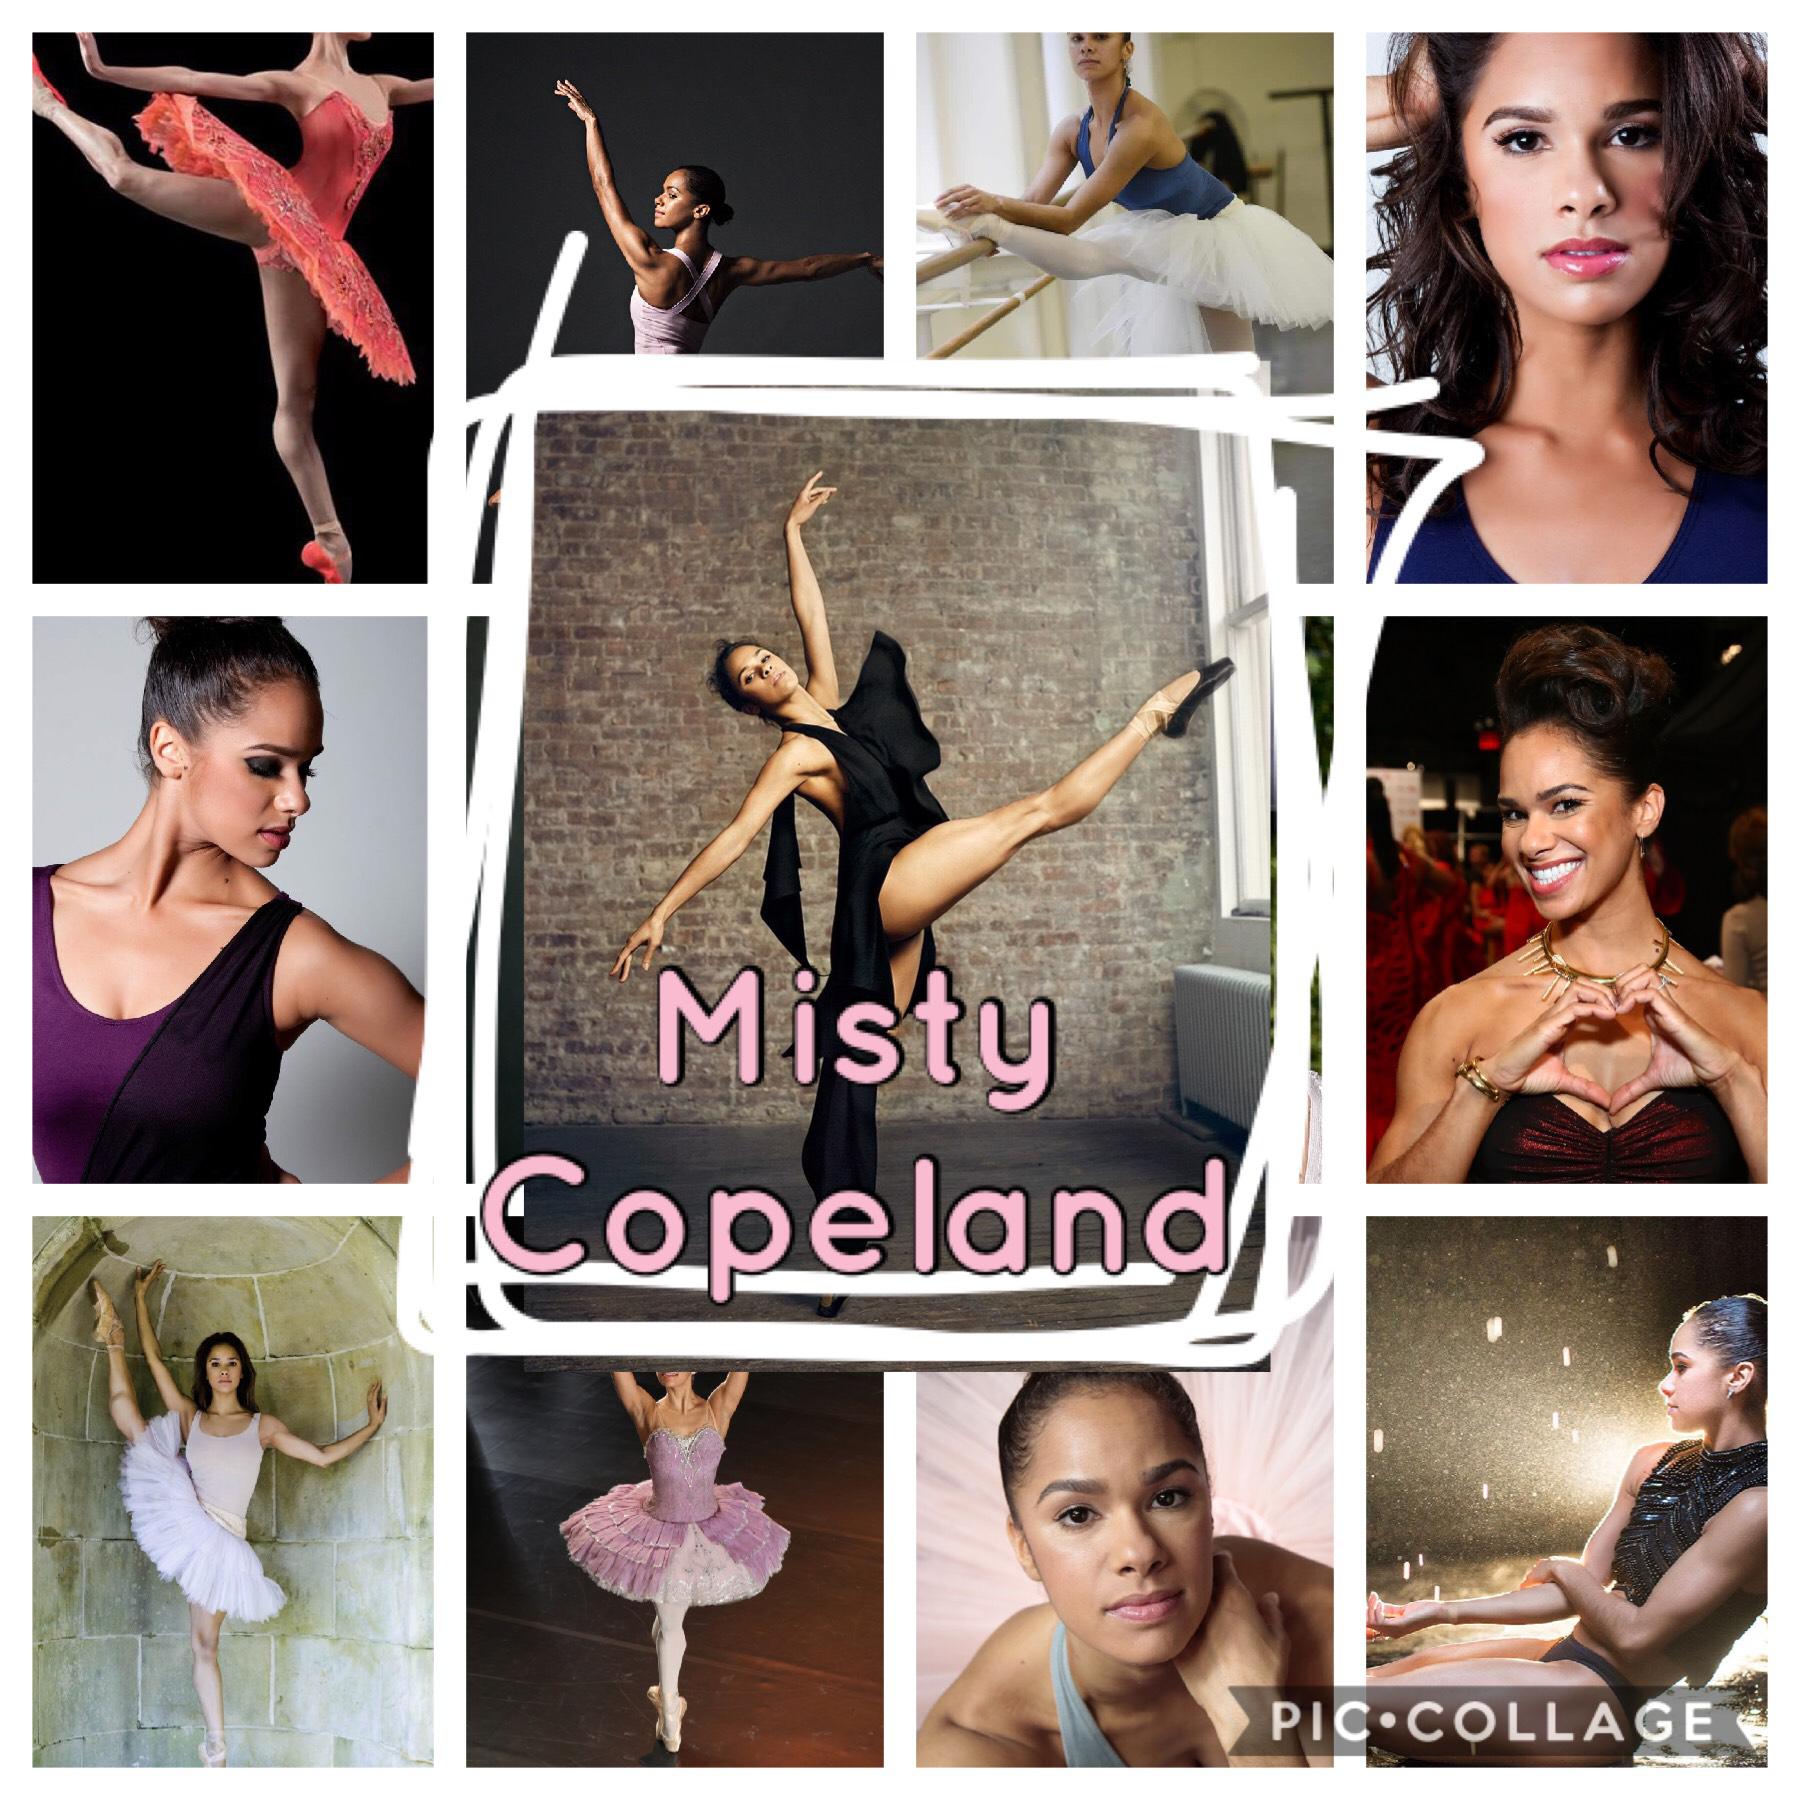 I freaking love Misty Copeland she is so amazing I hope one day I can be almost as good a dancer as her 😁